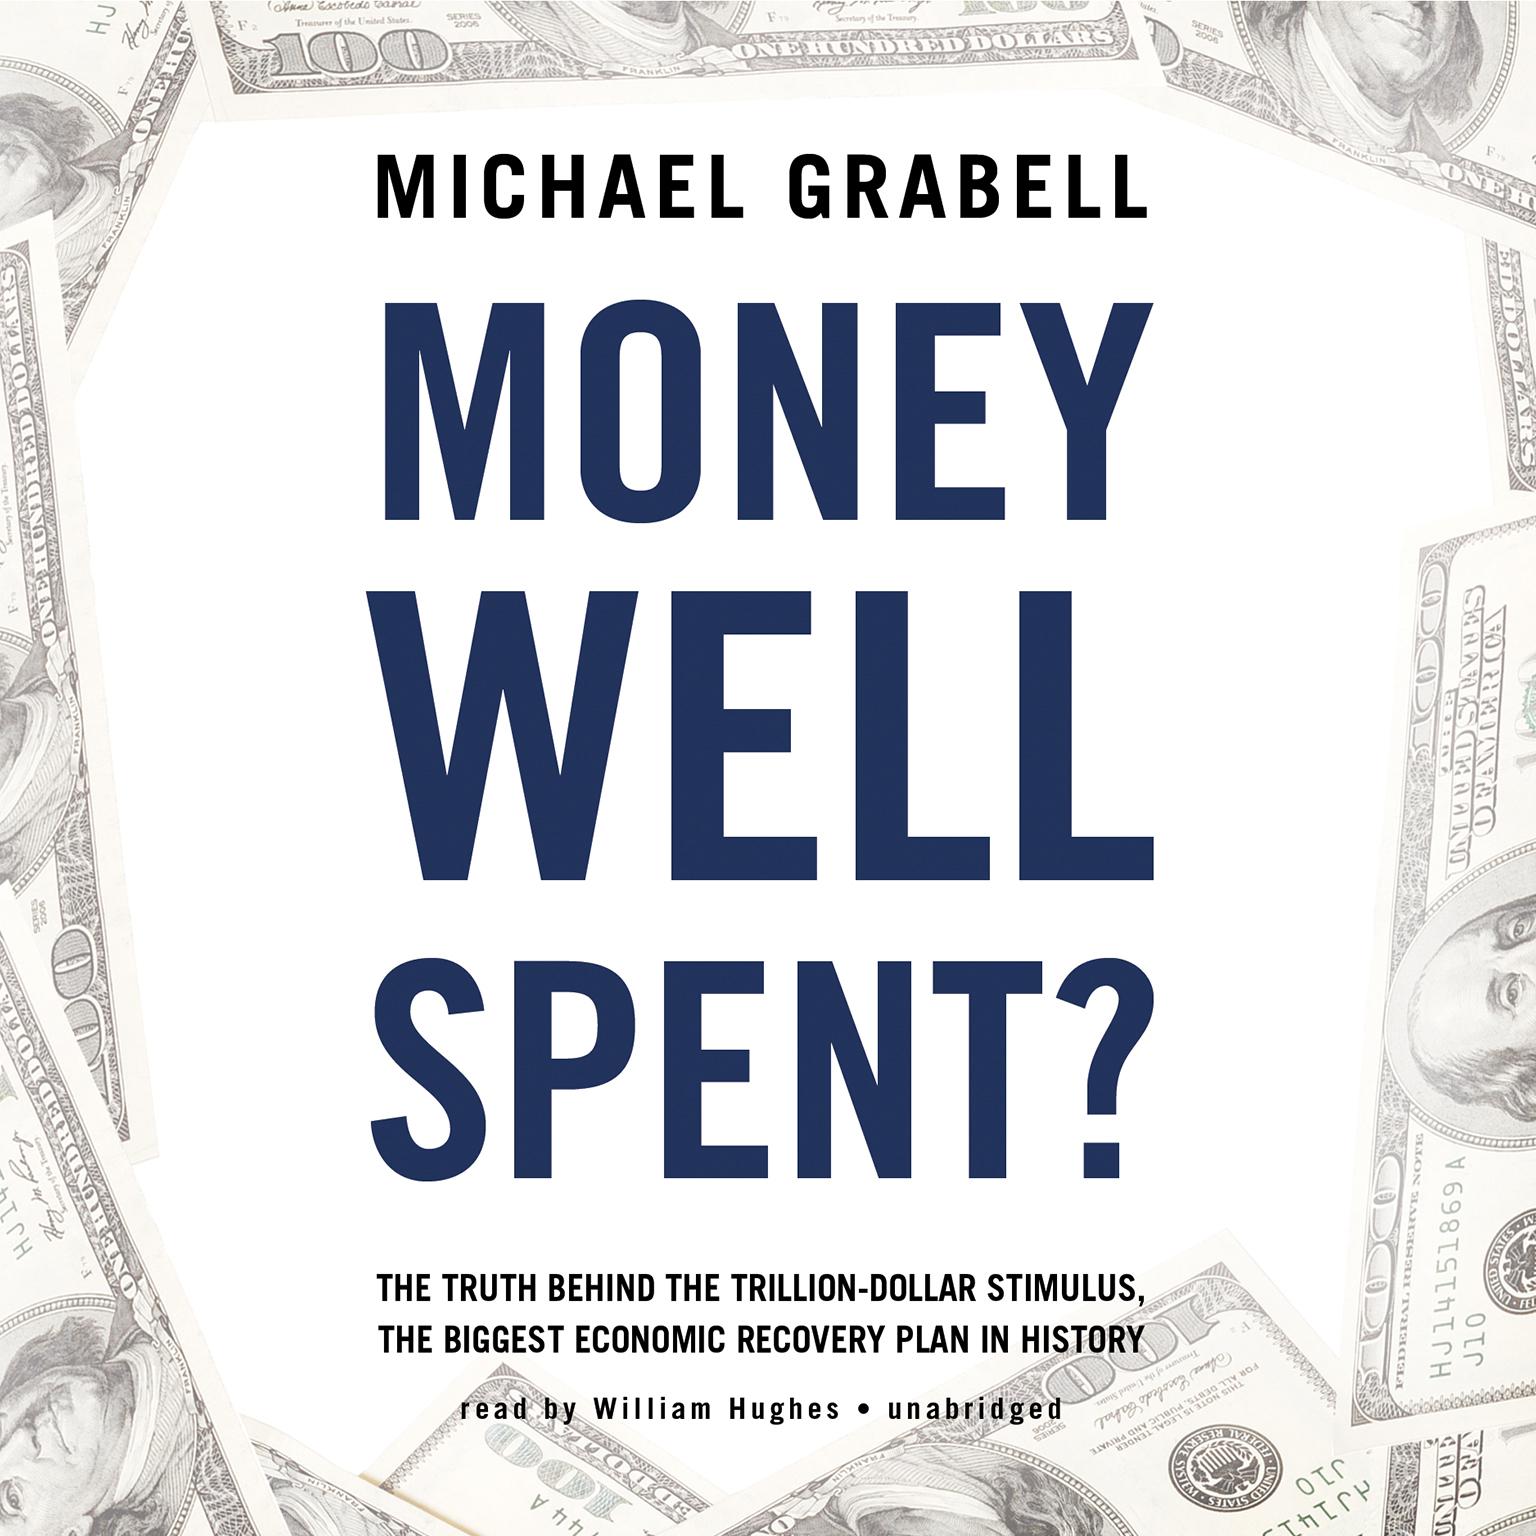 Money Well Spent?: The Truth behind the Trillion-Dollar Stimulus, the Biggest Economic Recovery Plan in History Audiobook, by Michael Grabell